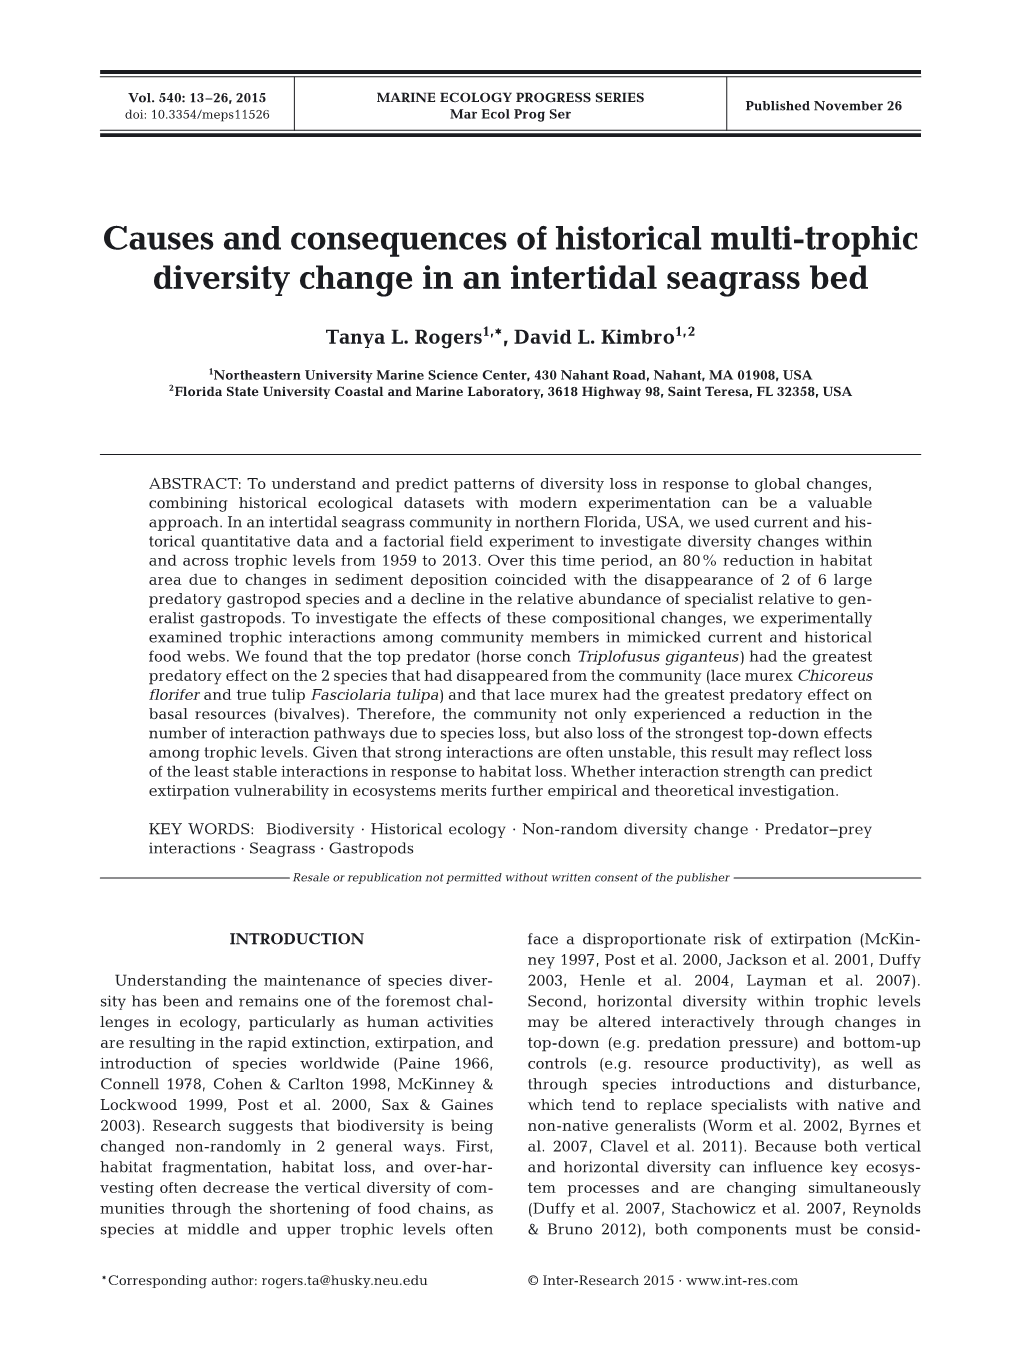 Causes and Consequences of Historical Multi-Trophic Diversity Change in an Intertidal Seagrass Bed